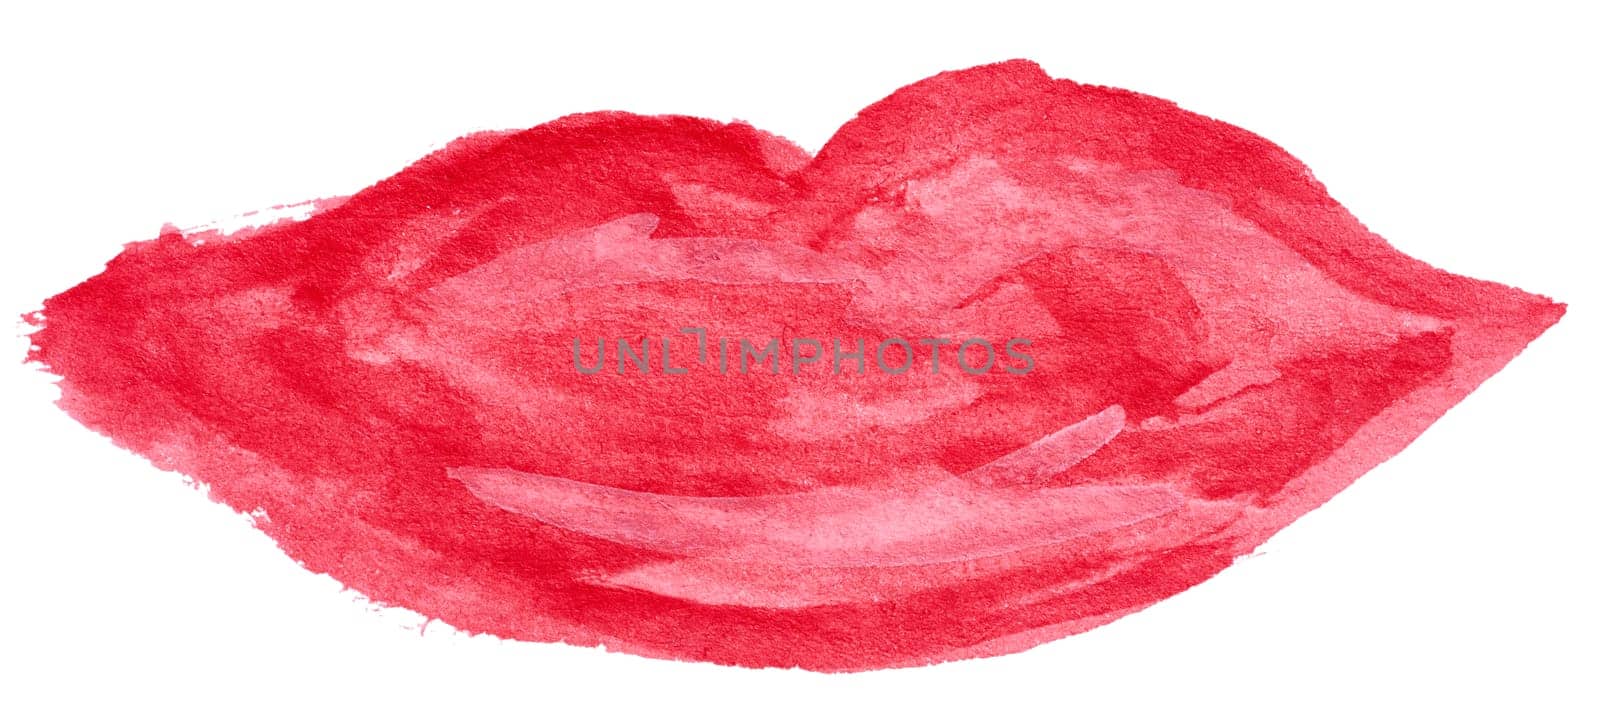 Painted lips in red watercolor on a white isolated background